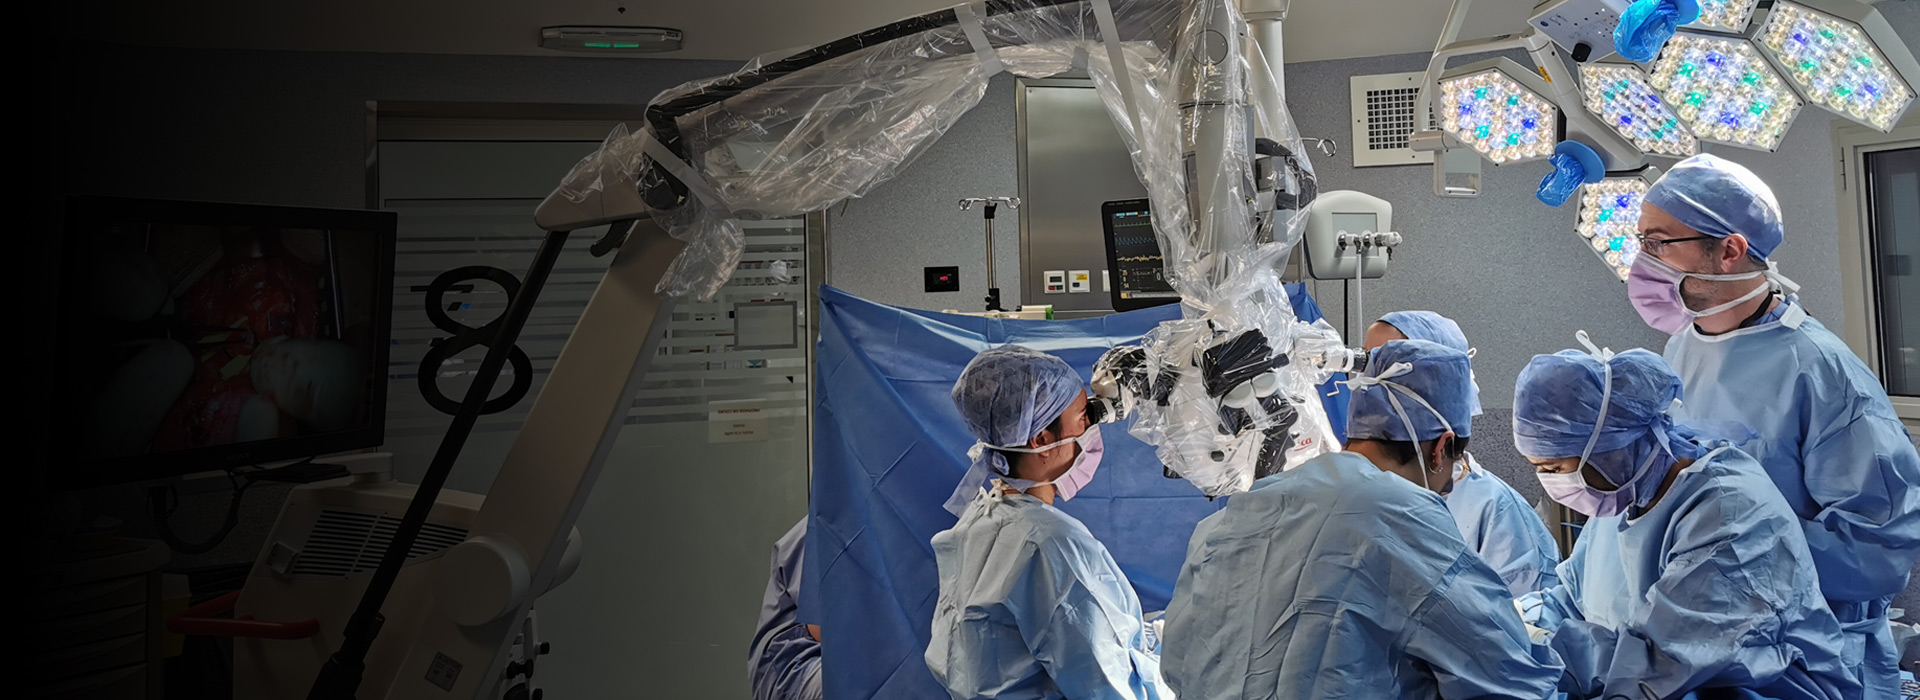 Background Image: A surgical team performing a breast reconstruction at the Gustave Roussy Institute, the leading cancer center in Europe. Dr. Leymarie’s team benefits from a long arm reach and and a large working space, allowing easy circulation around the patient. Here, Dr. Leymarie is watching the surgery directly from the screen